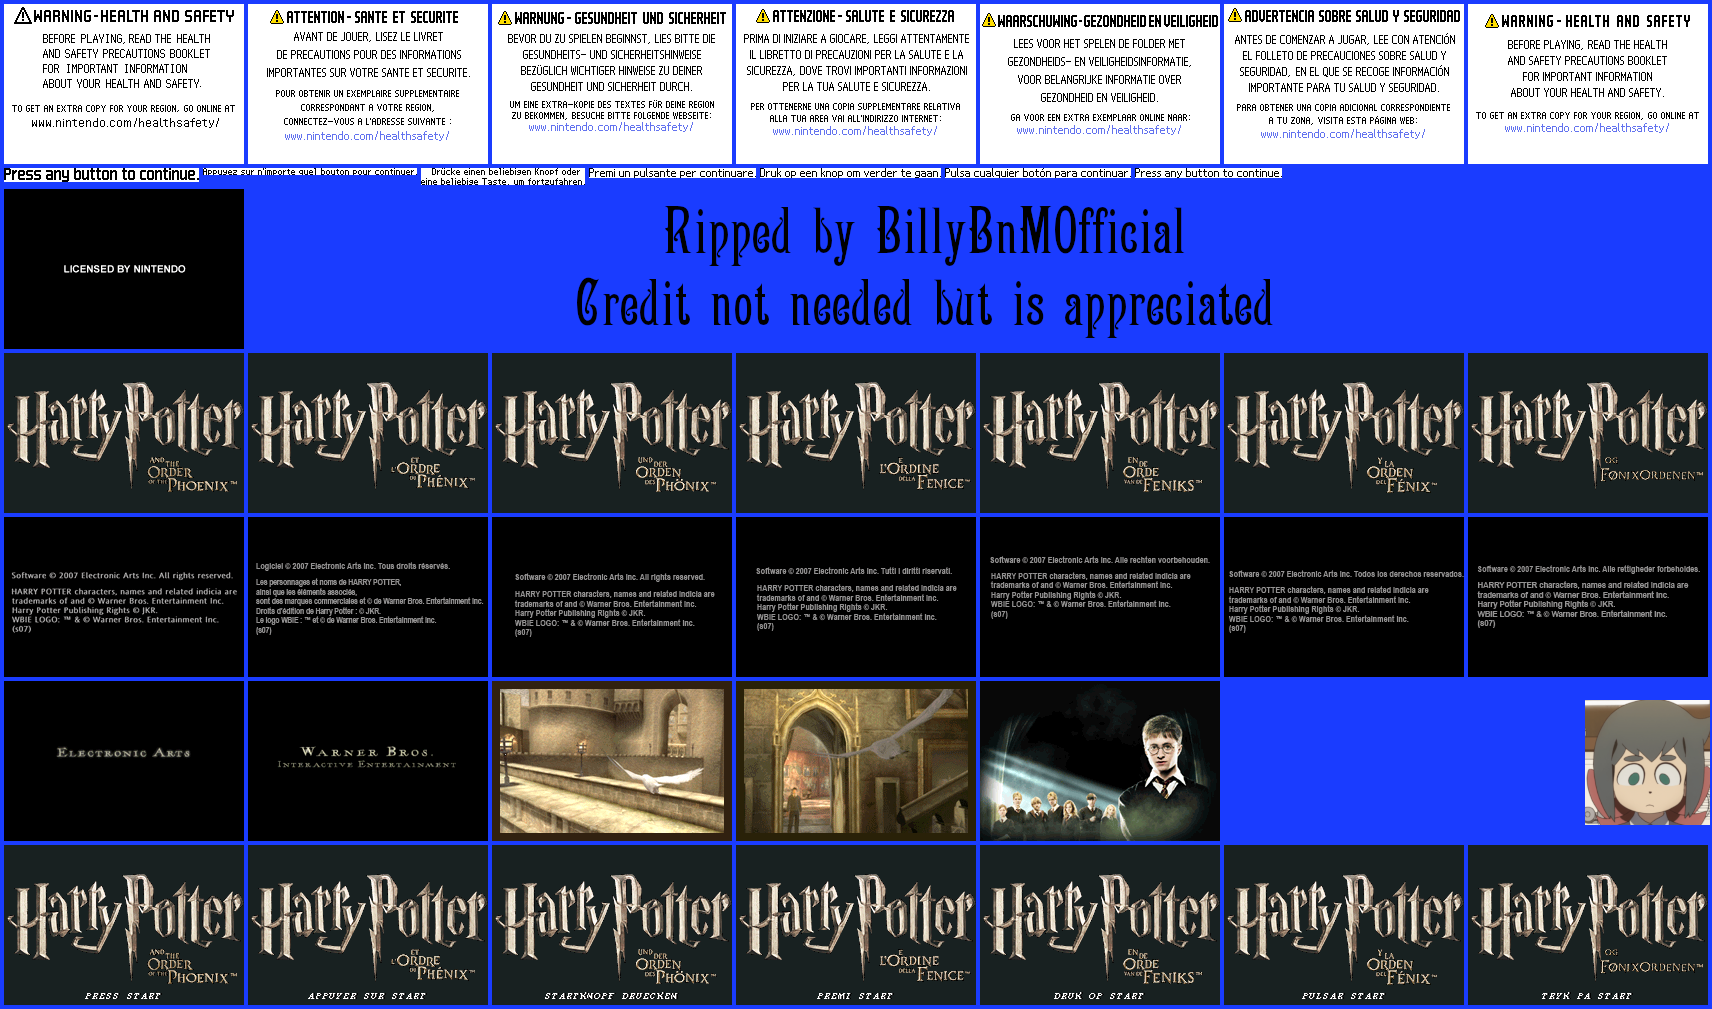 Harry Potter and the Order of the Phoenix - Health & Safety, Copyright, Title Screens, & Opening Cutscene